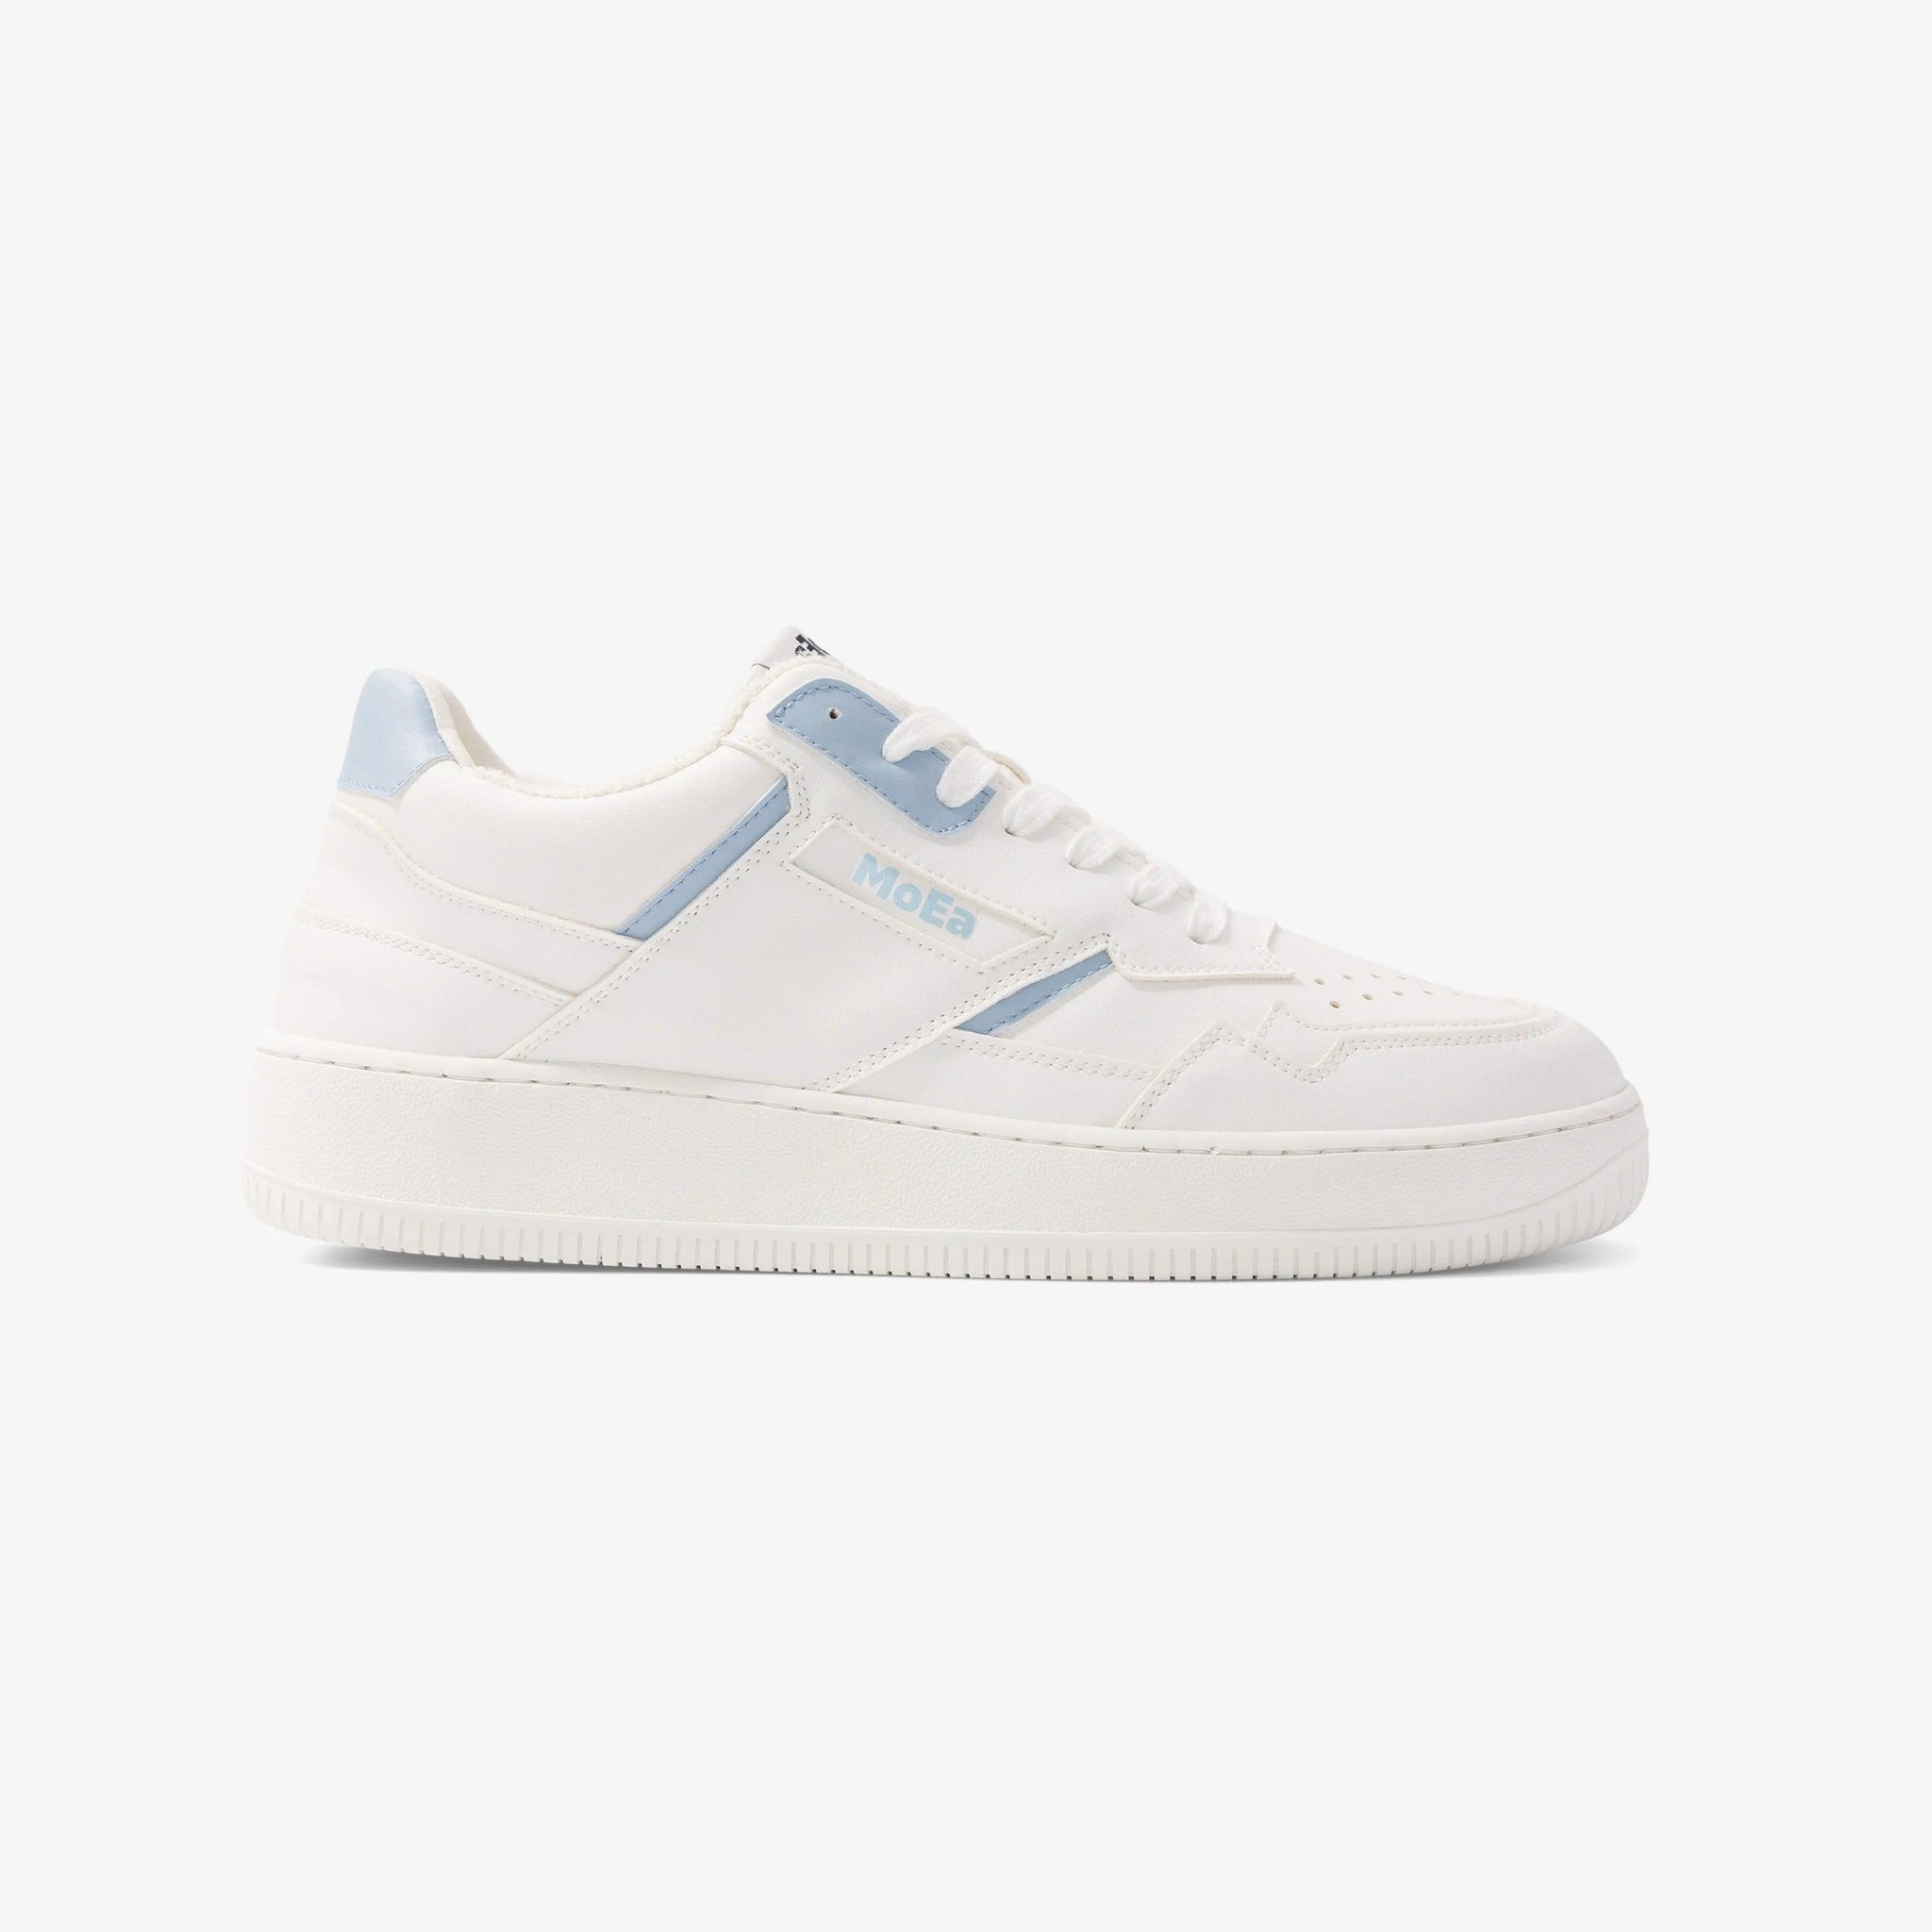 MoEa Gen1 Pet bottle Sky Blue and White trainer - MADE THE EDIT